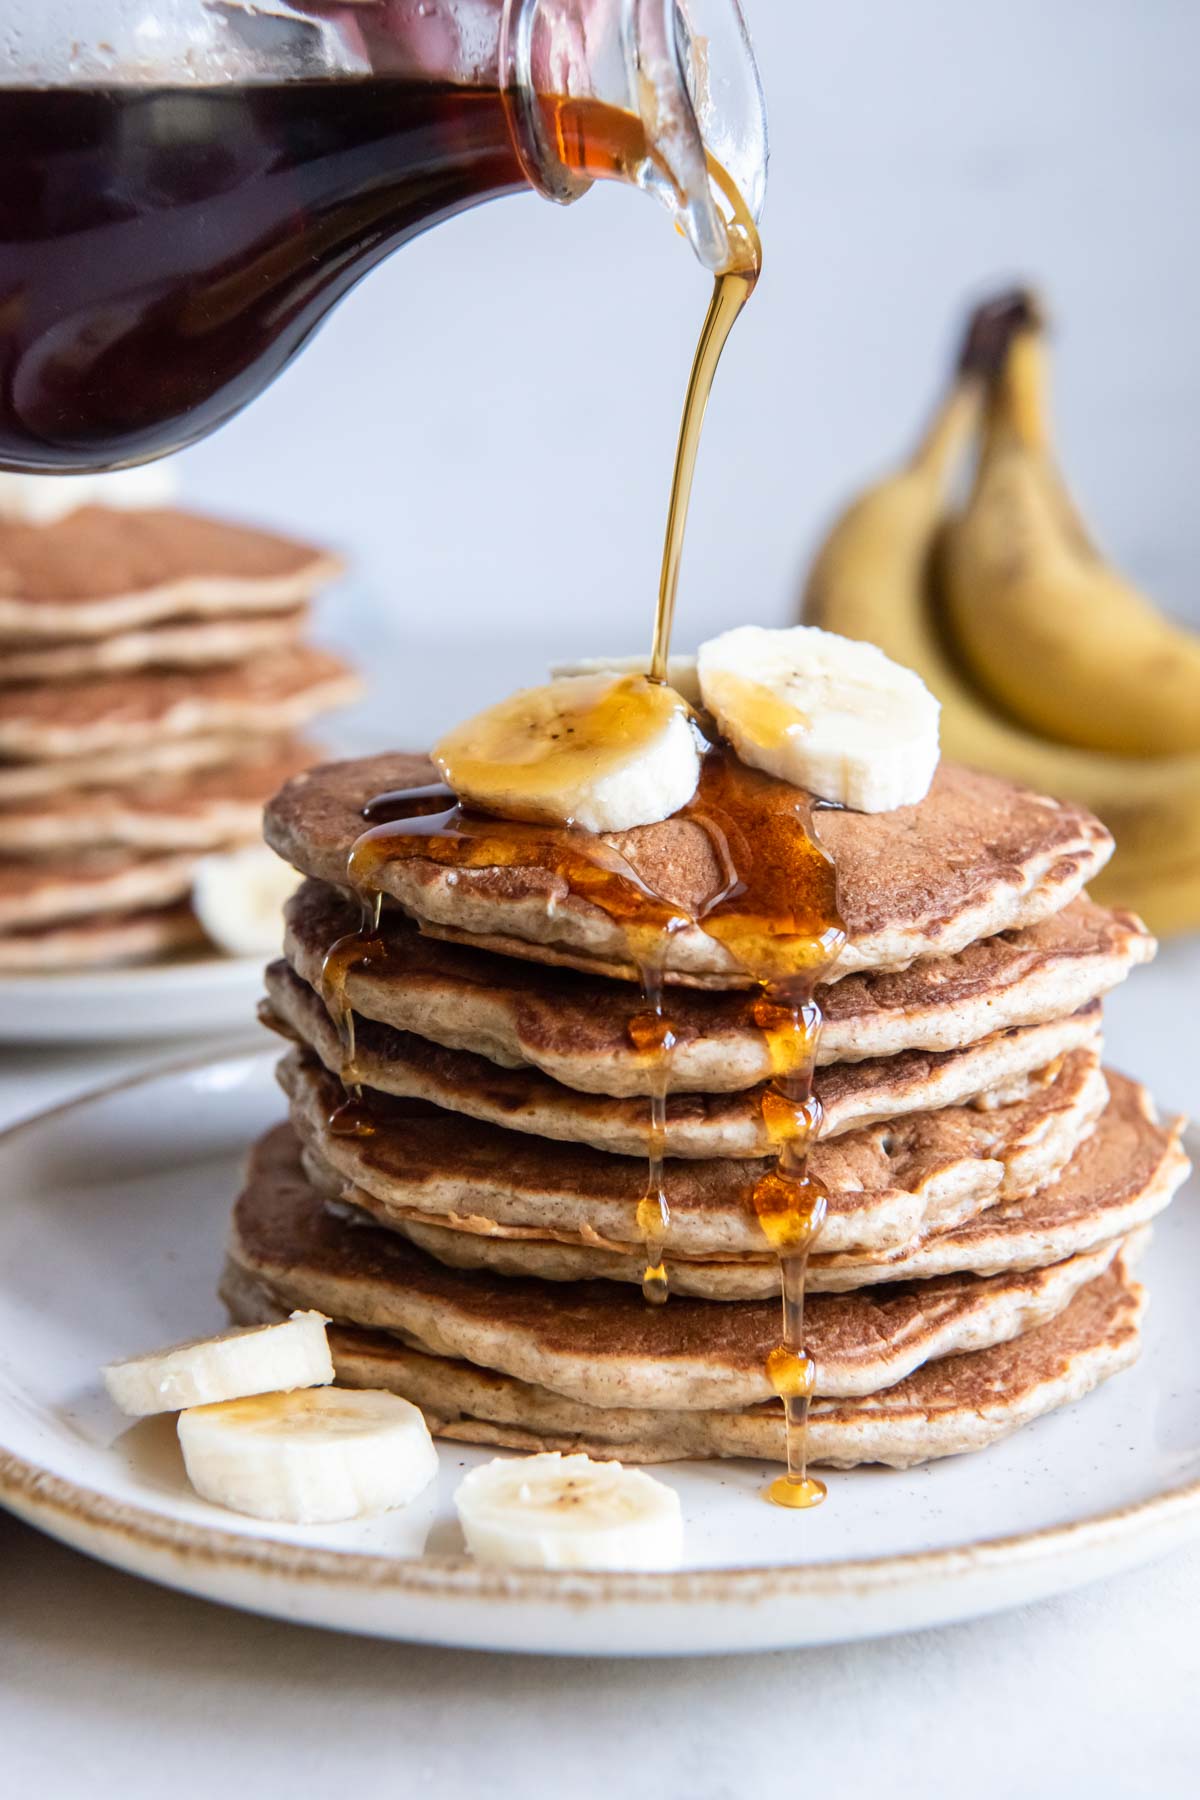 Pouring maple syrup onto stack of 7 banana pancakes topped with fresh banana slices.